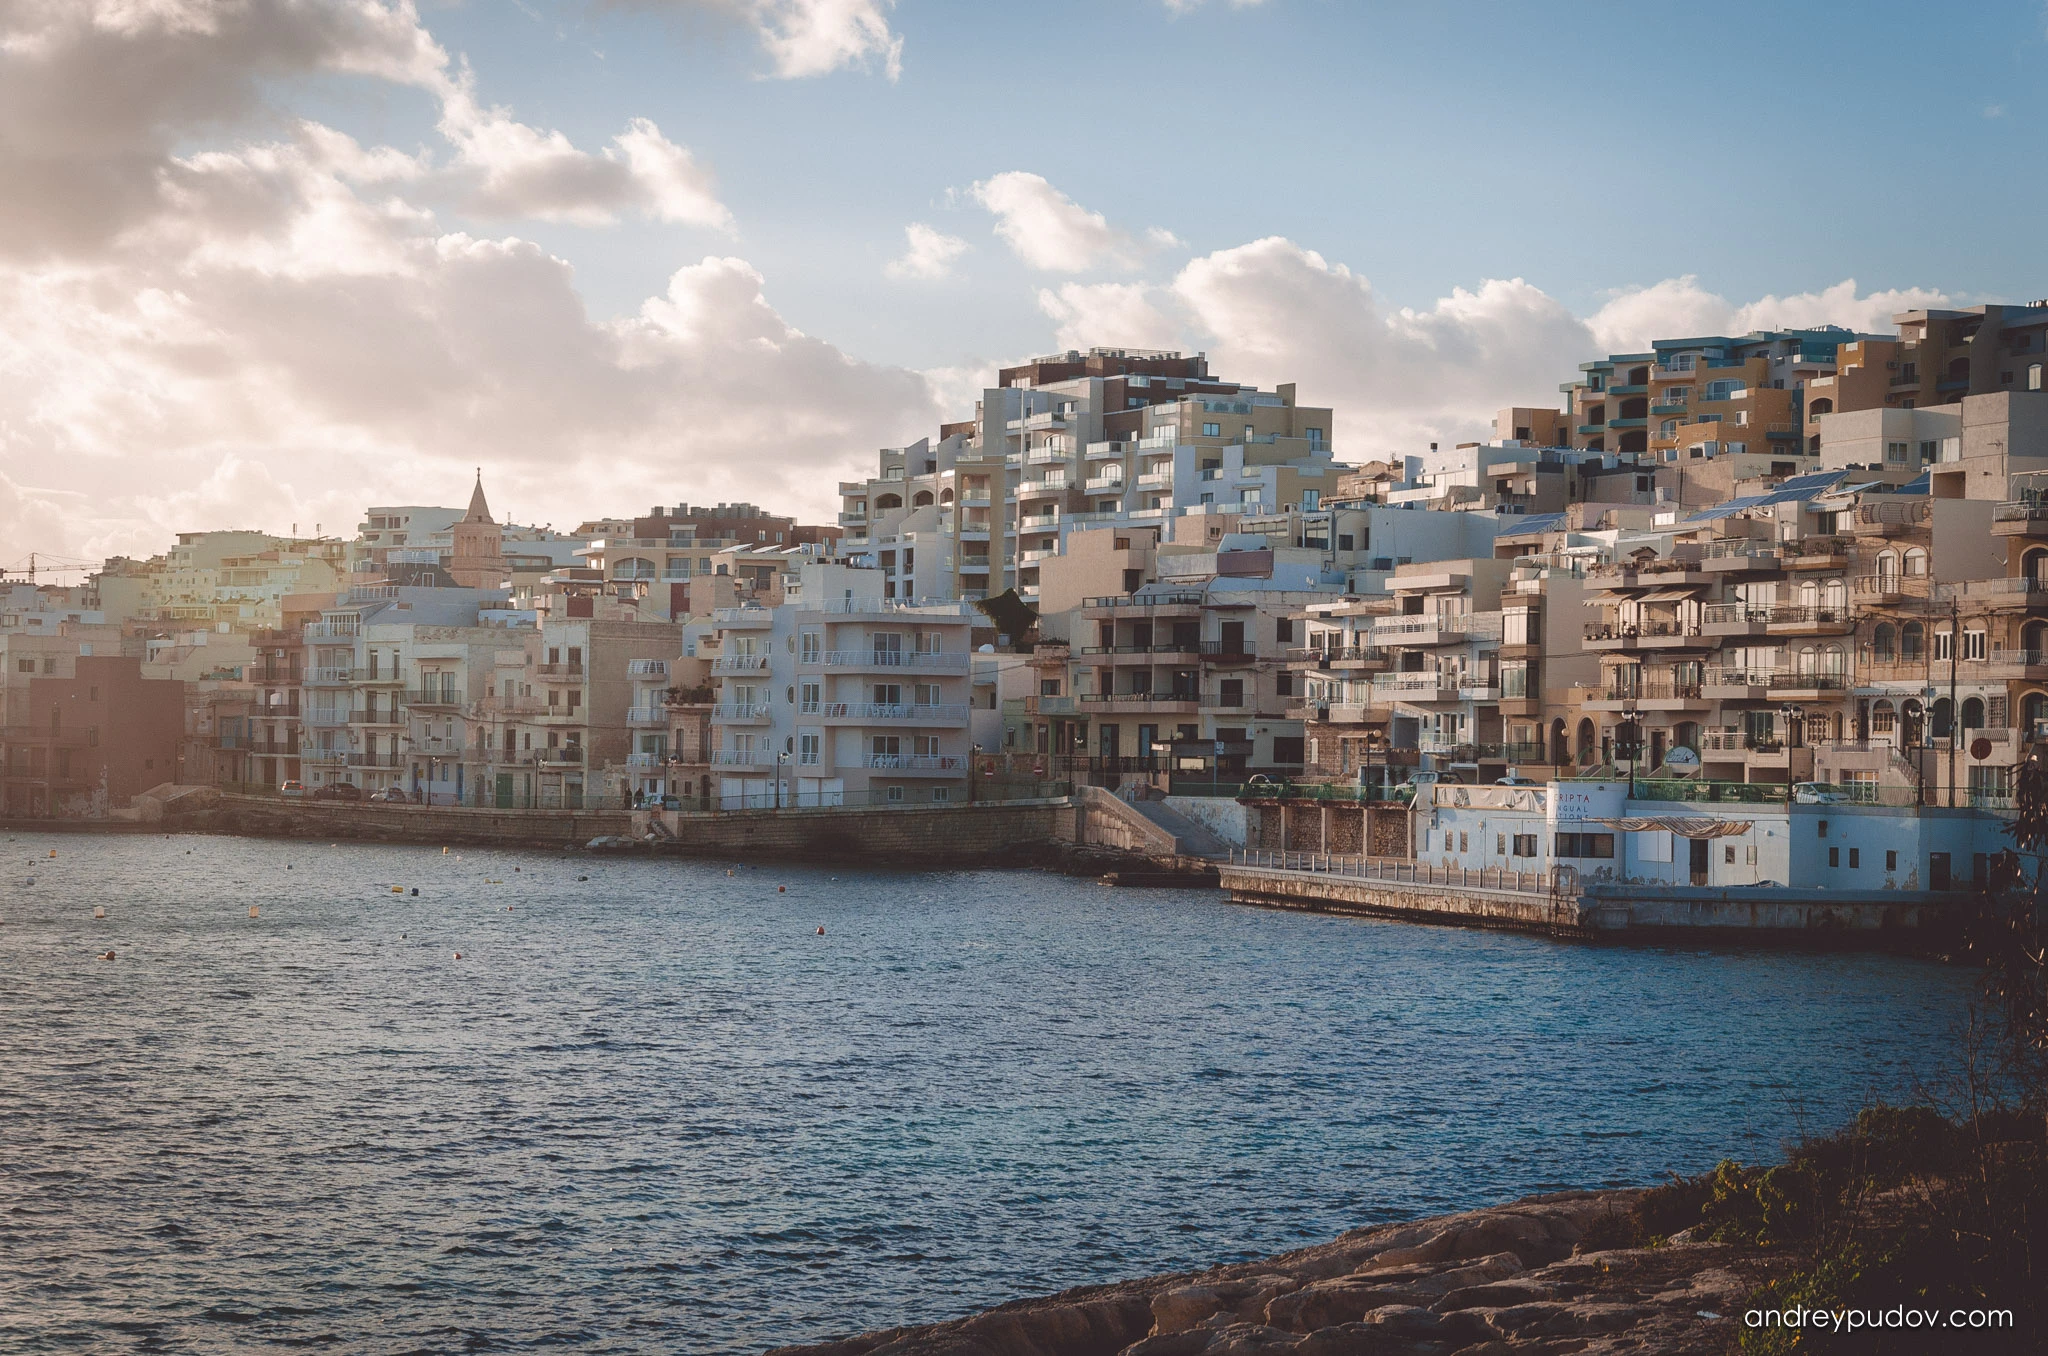 Sliema

Sliema is a town located on the northeast coast of Malta in the Northern Harbour District. It is a major residential and commercial area and a centre for shopping, bars, dining, and café life. It is also the most densely populated town on the island.